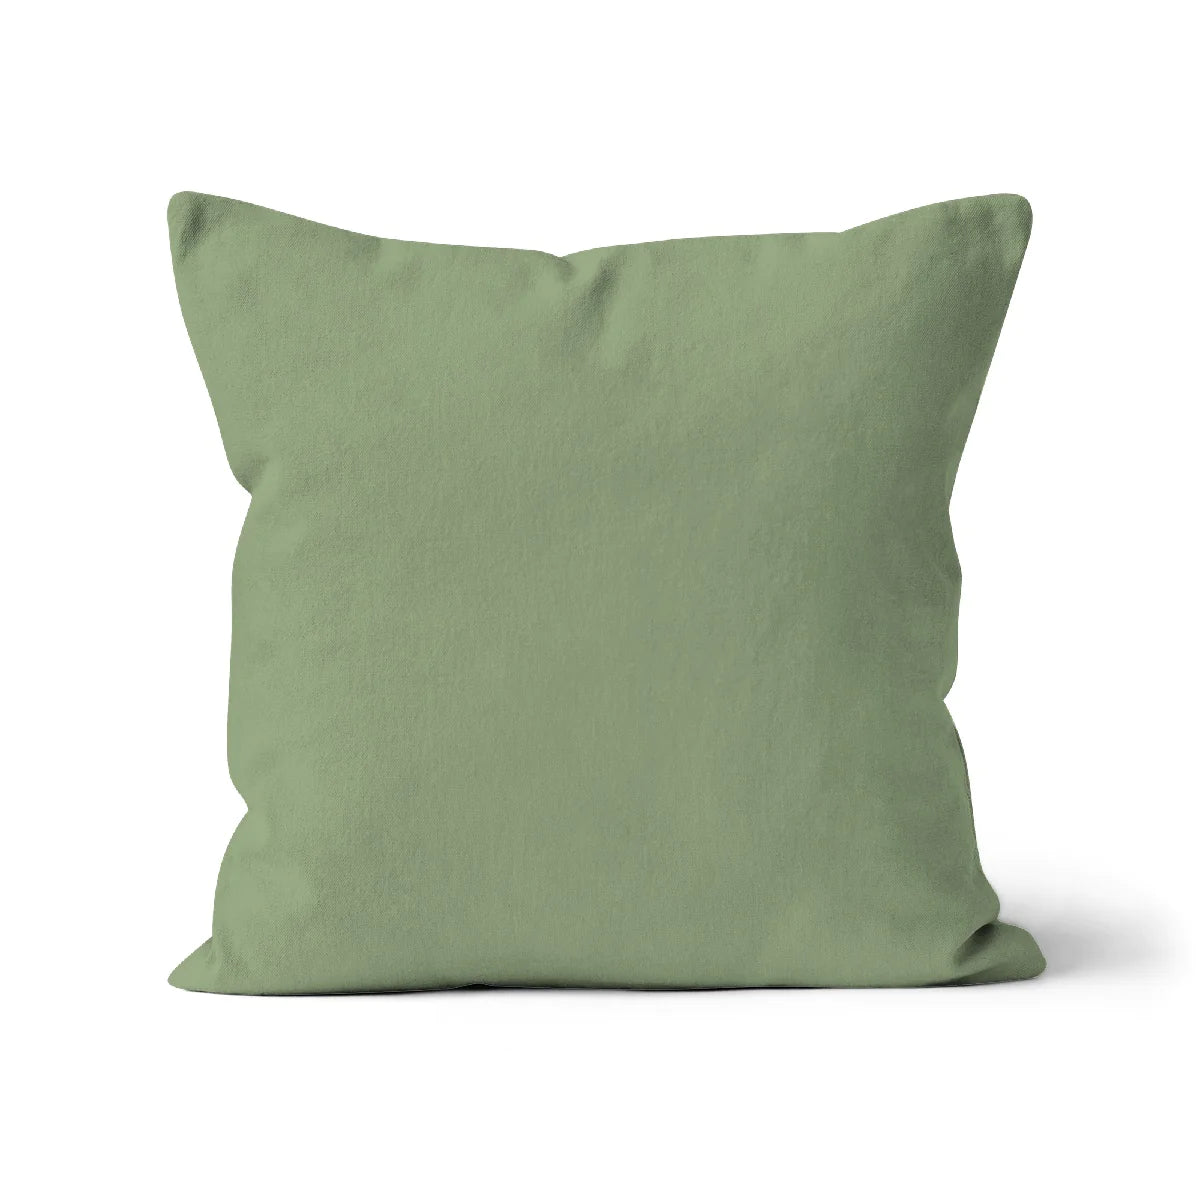 Sage green colour cotton cushion cover. Light green cushion cover. Pale grey-green pillow cover. Organic cotton. Square cushion cover. Unfilled cushion. Organic cotton cushion. Made in the UK. British-Made. Sustainable homeware. Plain cushion covers. Eco-friendly cushion. High-quality cushion covers. Machine washable cushion covers. Plain colour cushion covers.